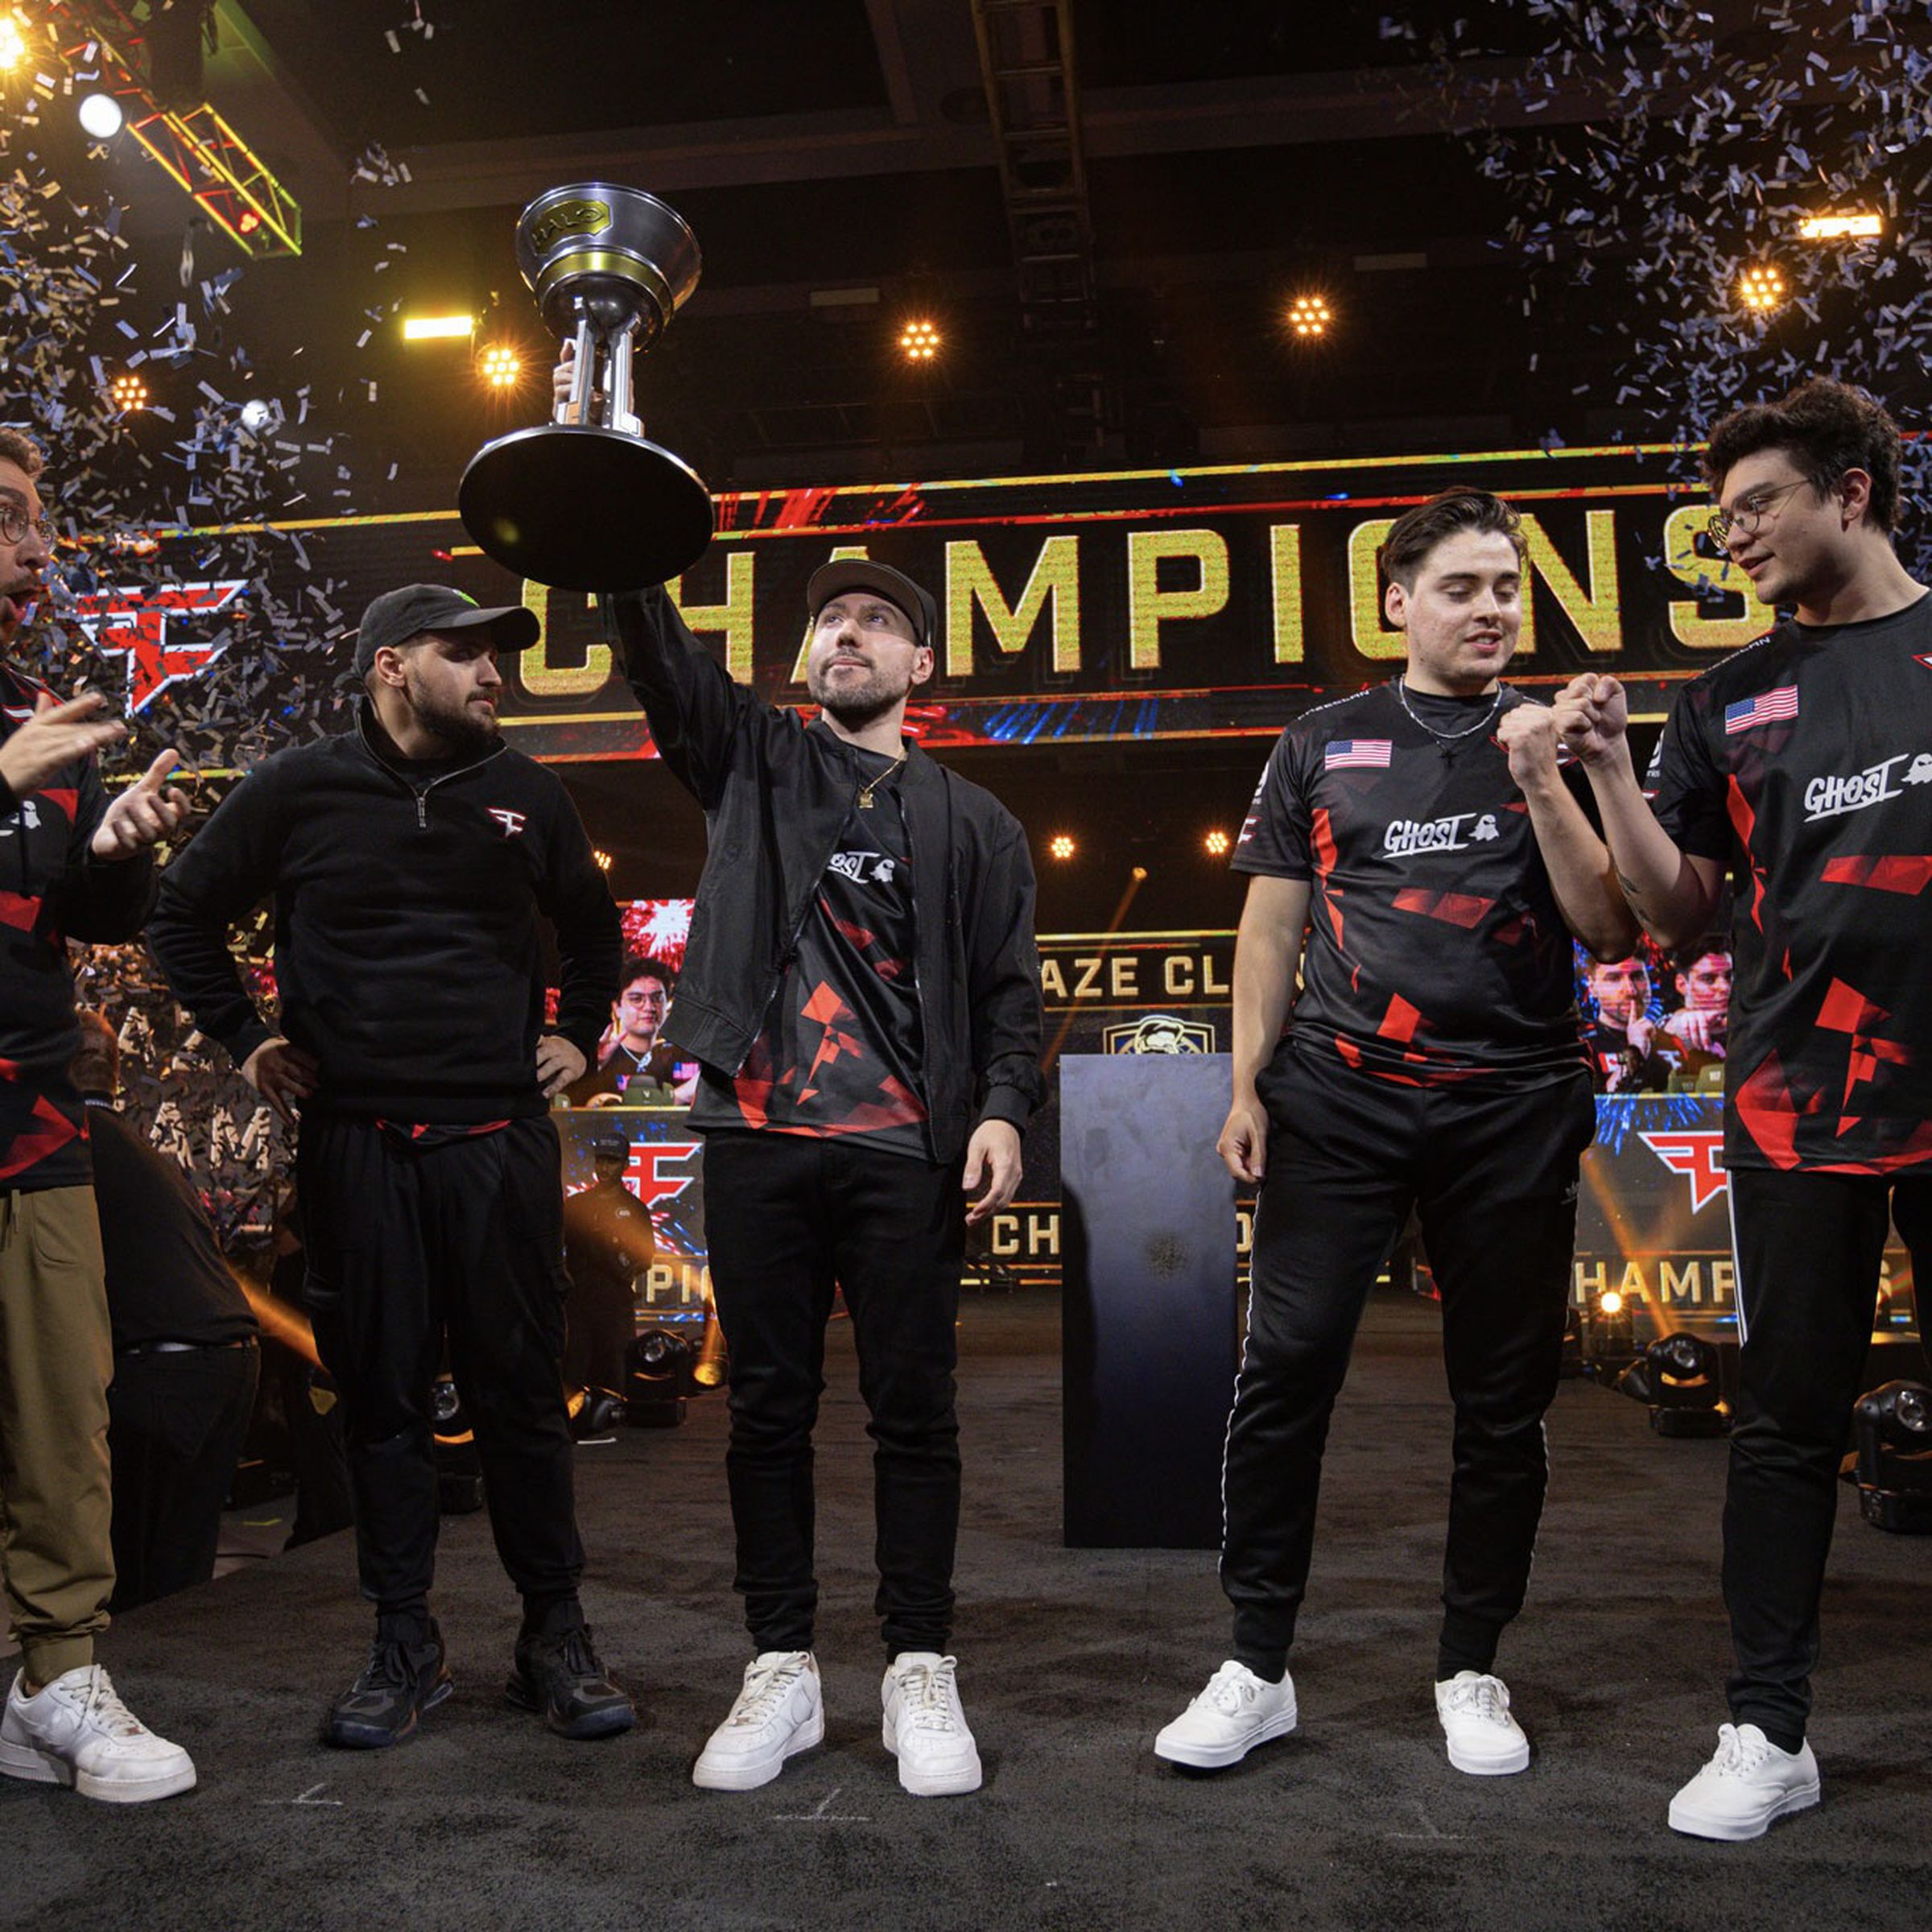 Five Faze Clan participants in celebration with one holding up trophy as confetti drops and champions banner displays above